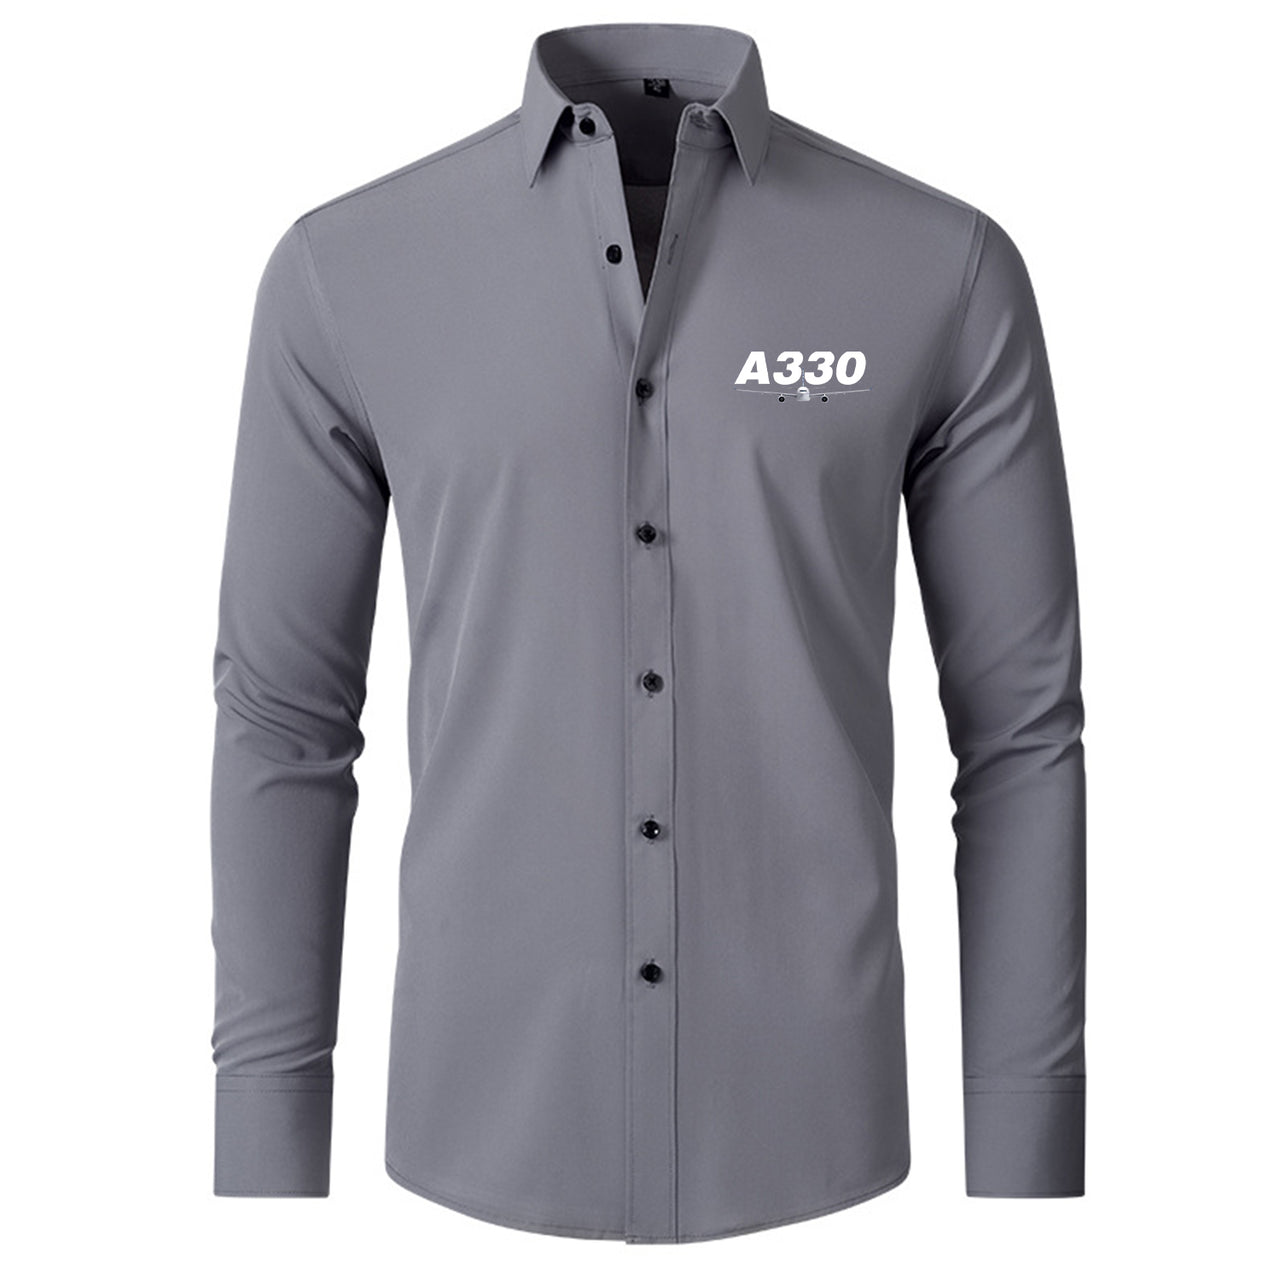 Super Airbus A330 Designed Long Sleeve Shirts